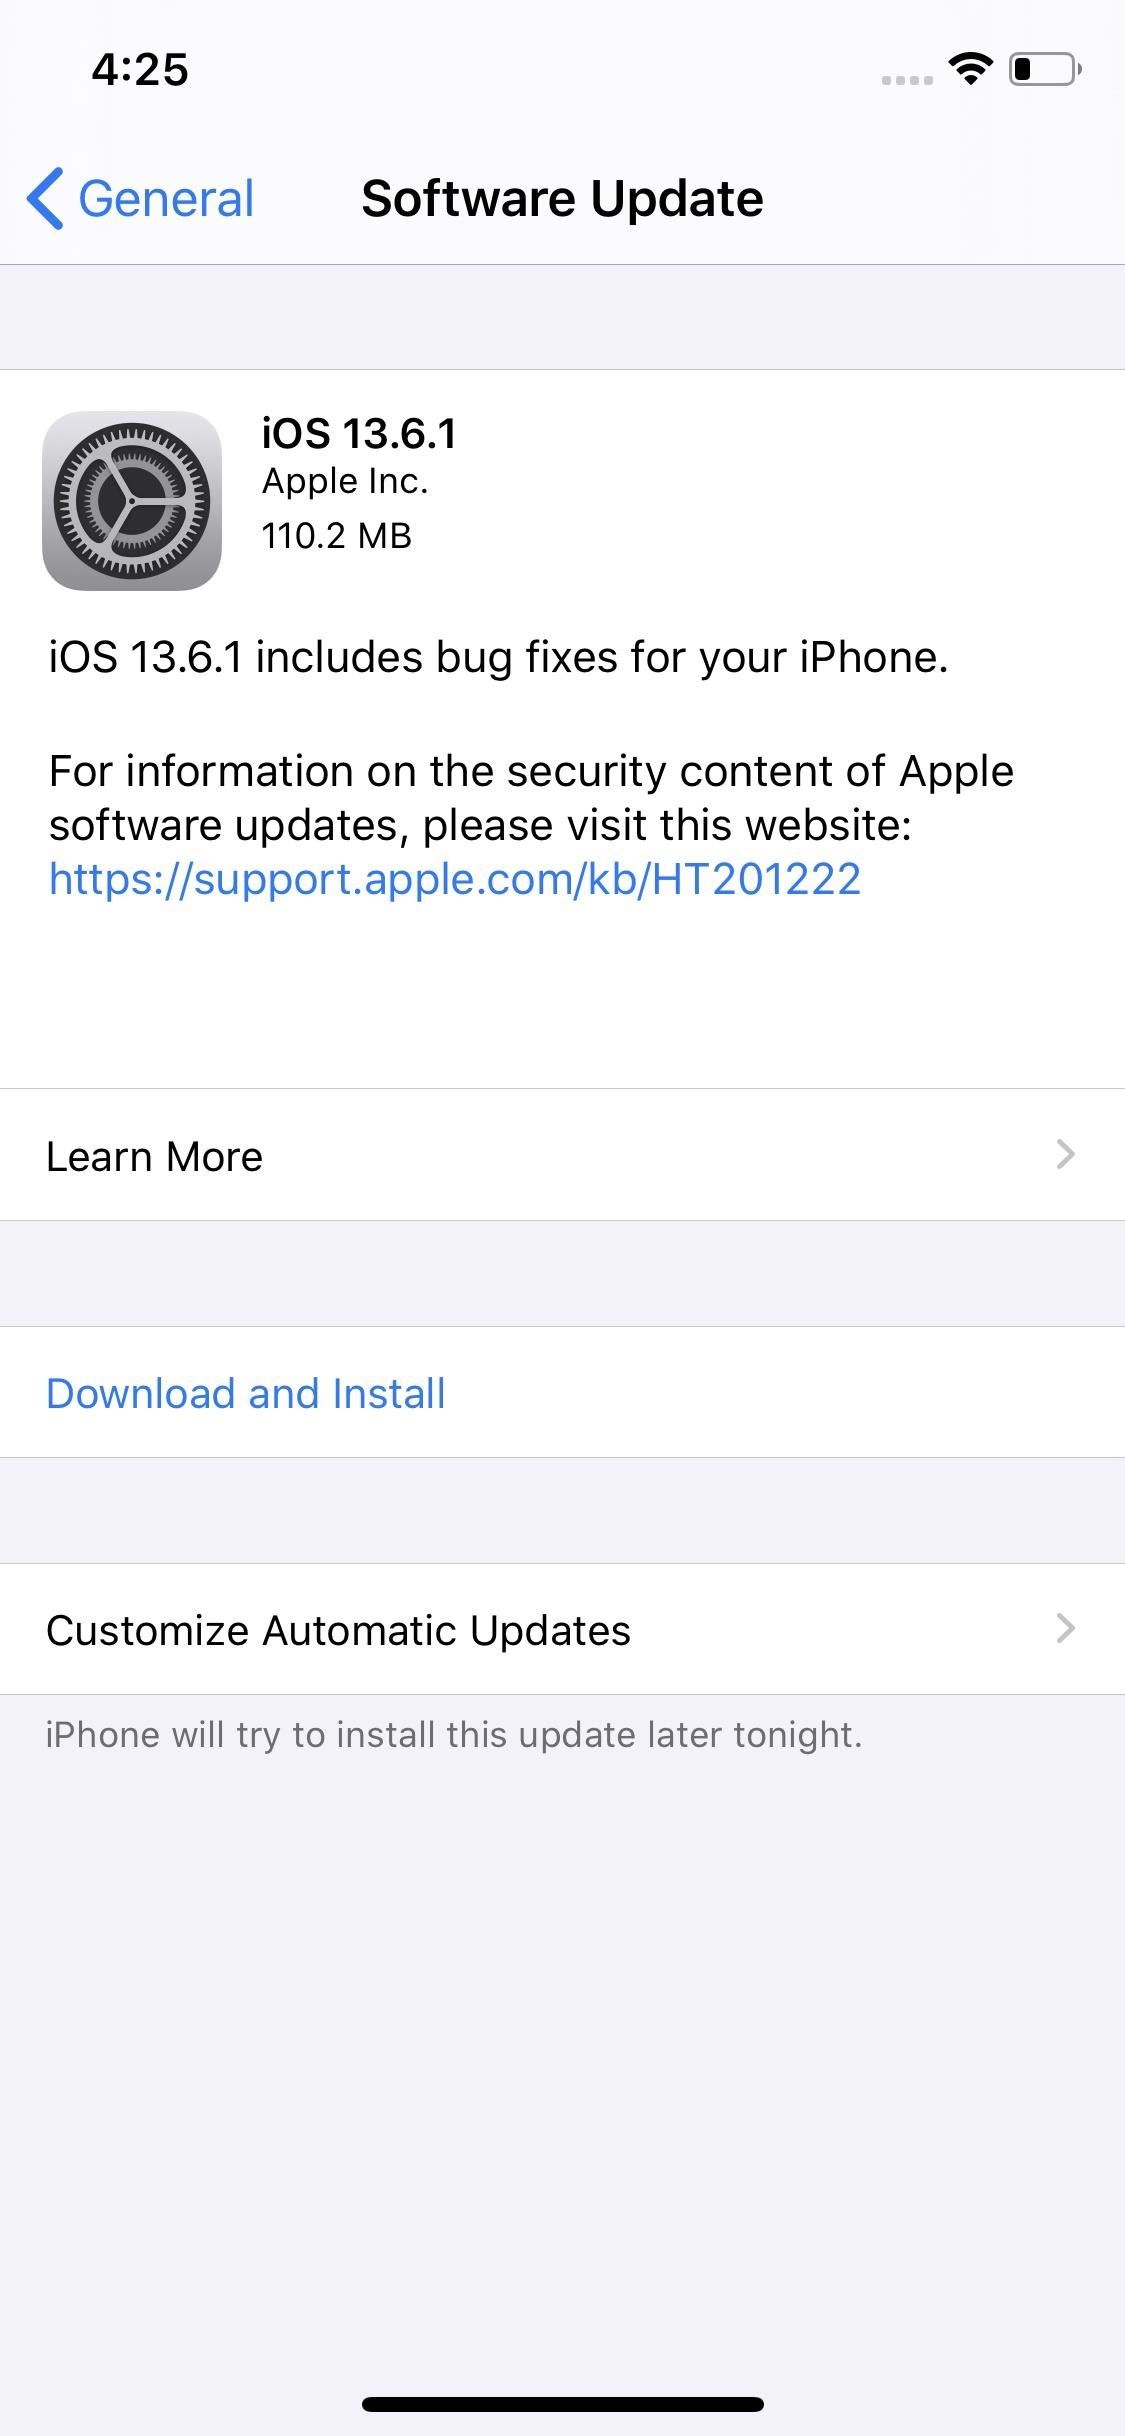 Apple Releases iOS 13.6.1 for iPhone, Adds Bug Fixes for Exposure Notifications, Thermal Management & Automated Storage